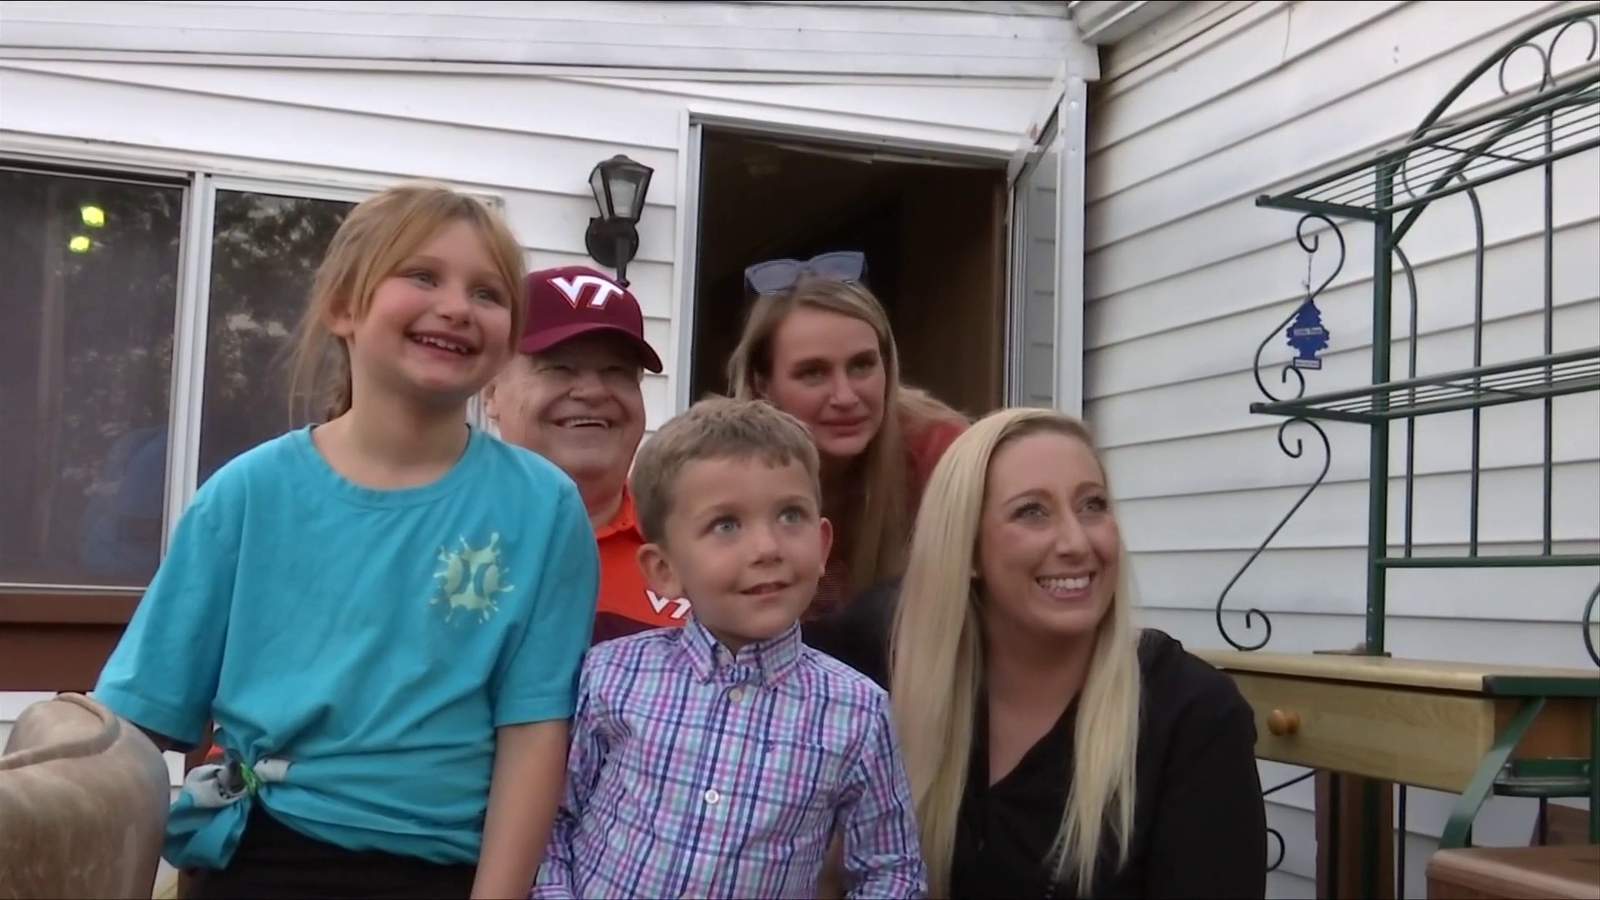 ‘I knew that he deserved family’: Man’s medical emergency leads to friendship, house restoration